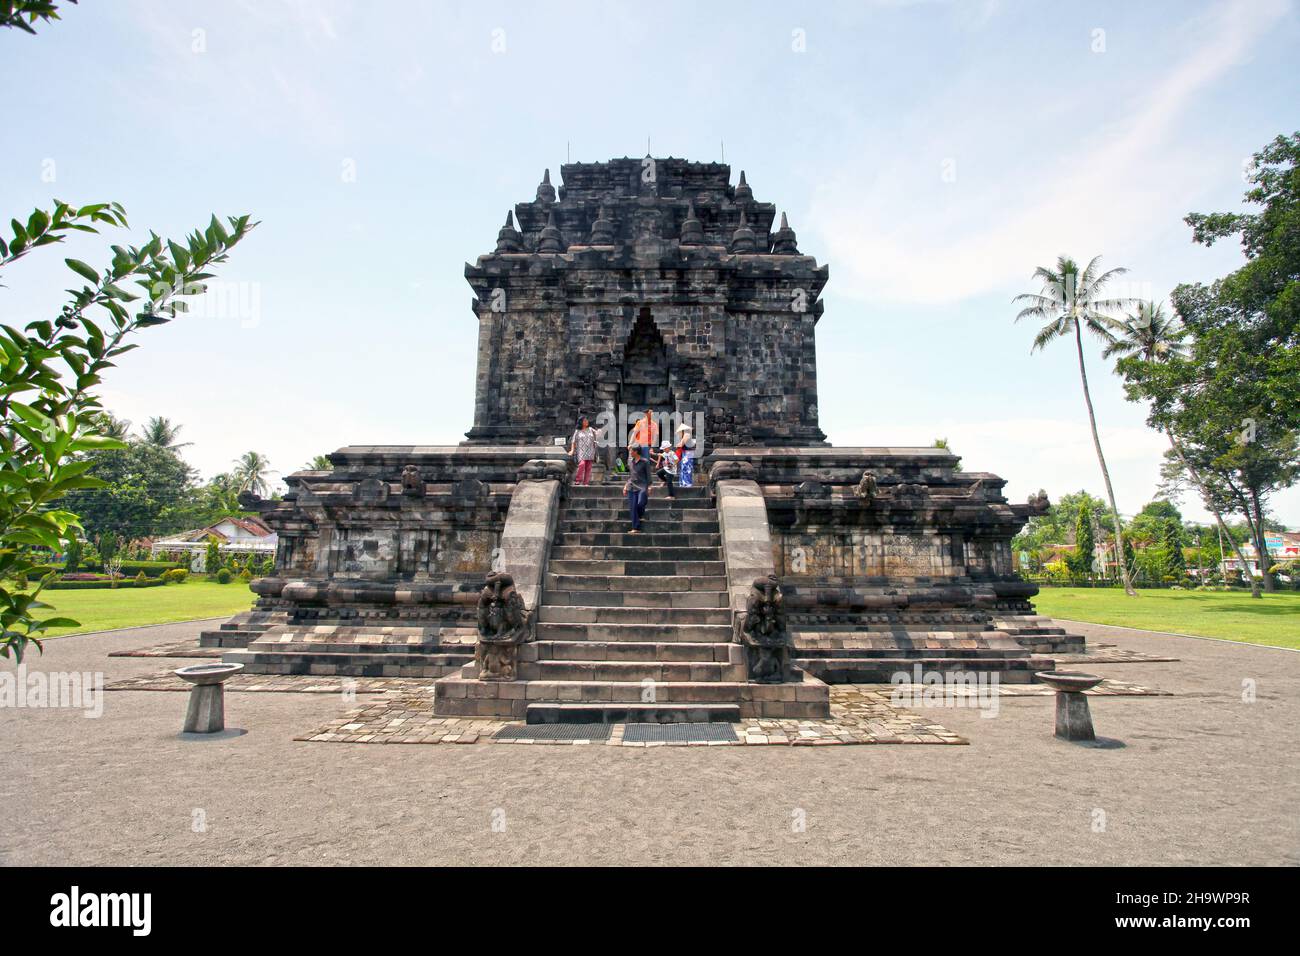 The Mendut Temple in Mendut village in Magelang built in the 9th Century AD in Central Java, Indonesia is just 3 km from Borobudur. Stock Photo